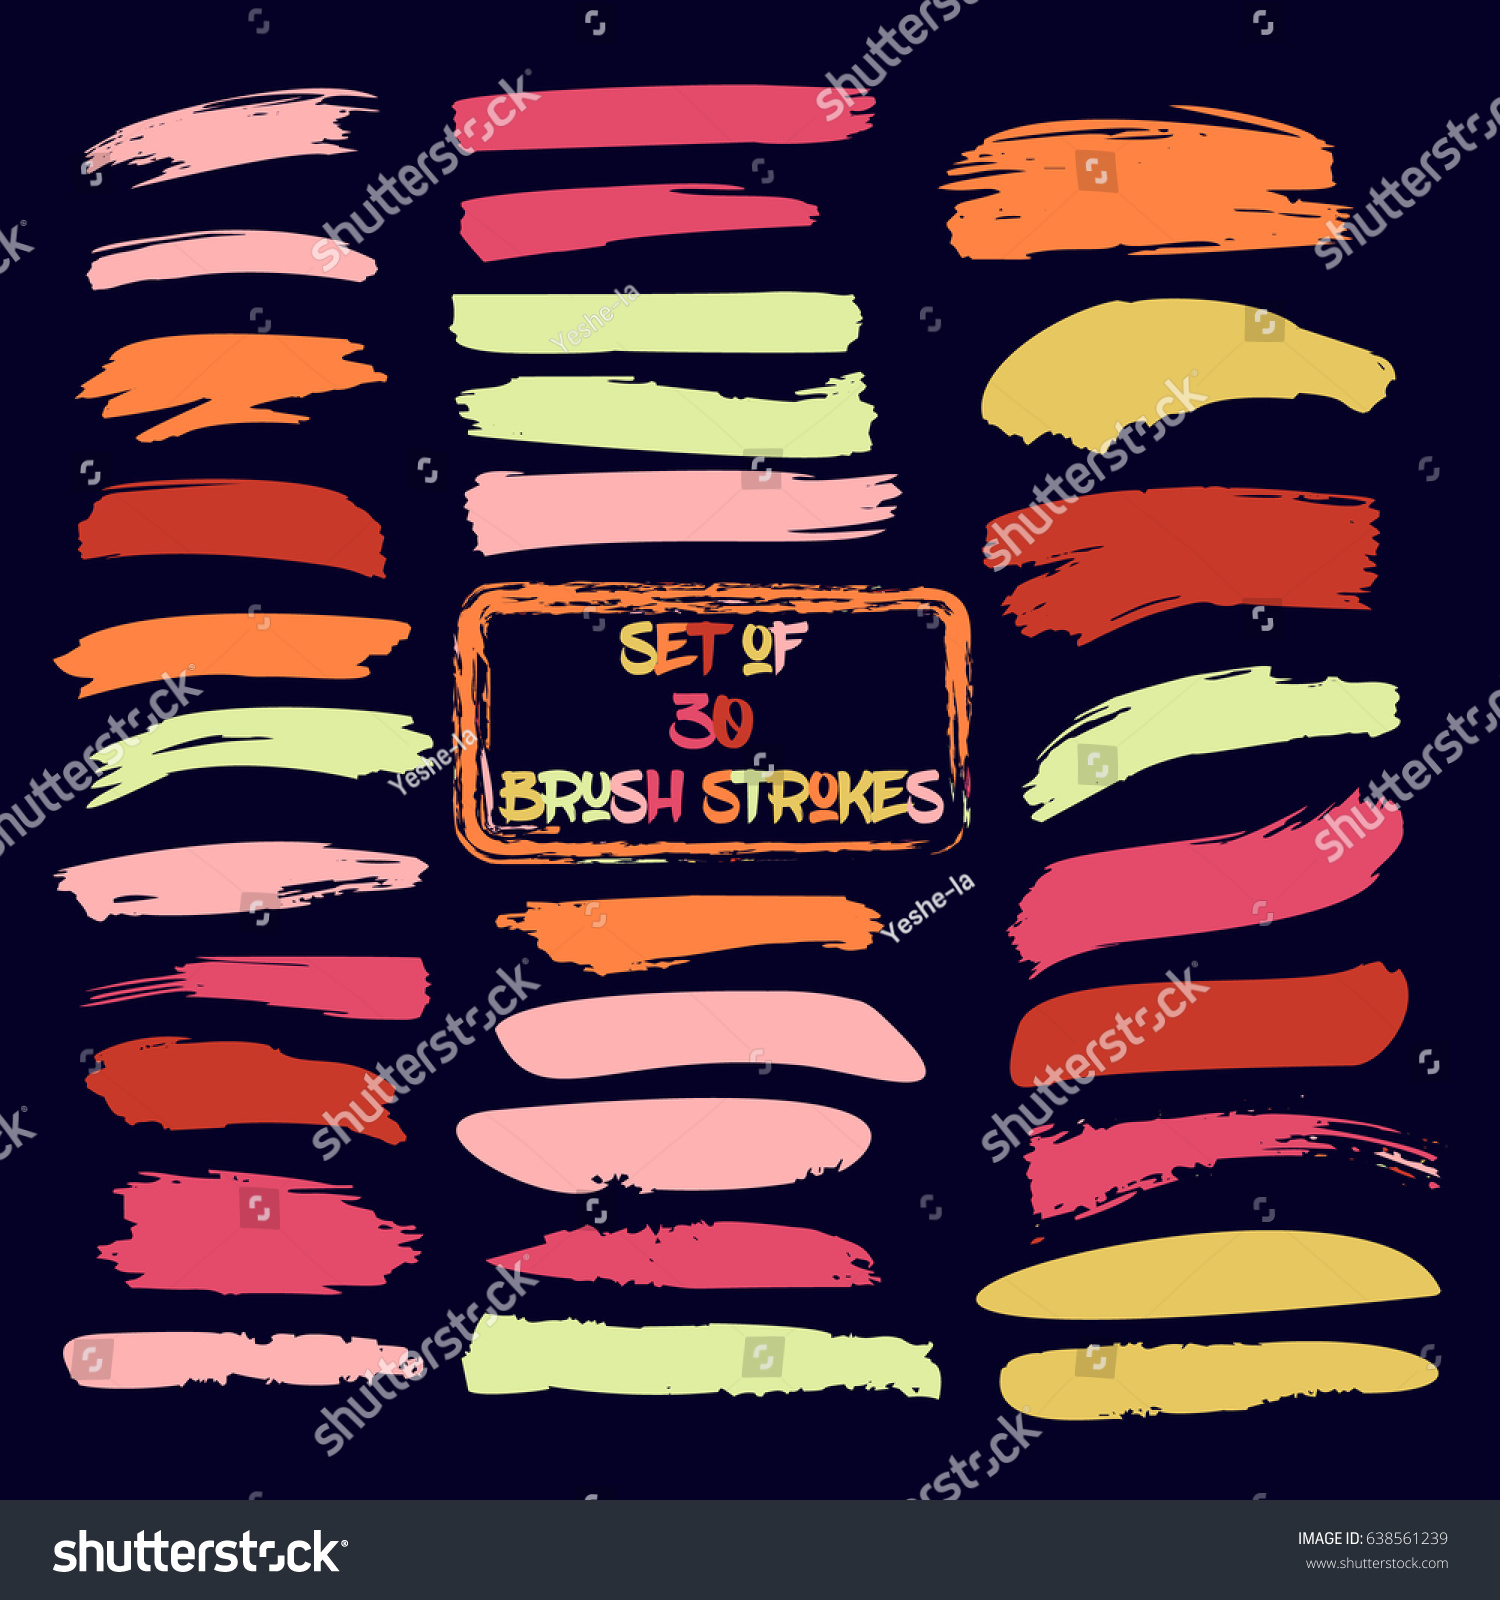 SVG of Set of thirty trendy red, yellow, orange, and pink vector brush strokes or backgrounds. Hand painted ink brush strokes, brushes, and lines. Dirty grunge artistic design elements.  svg